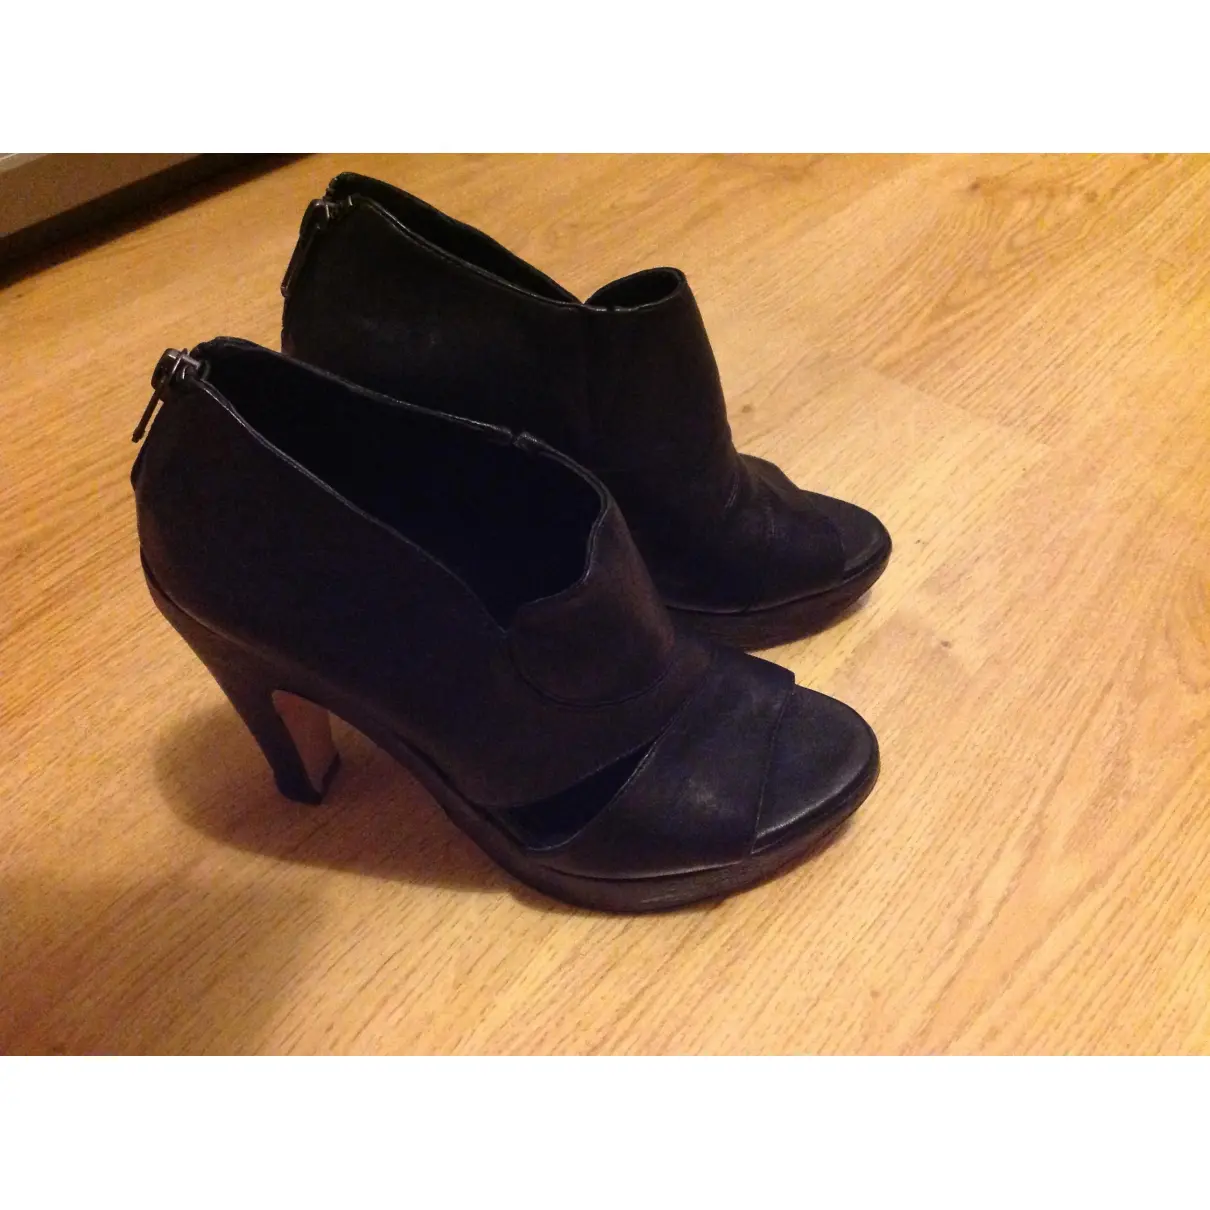 Joseph Leather open toe boots for sale